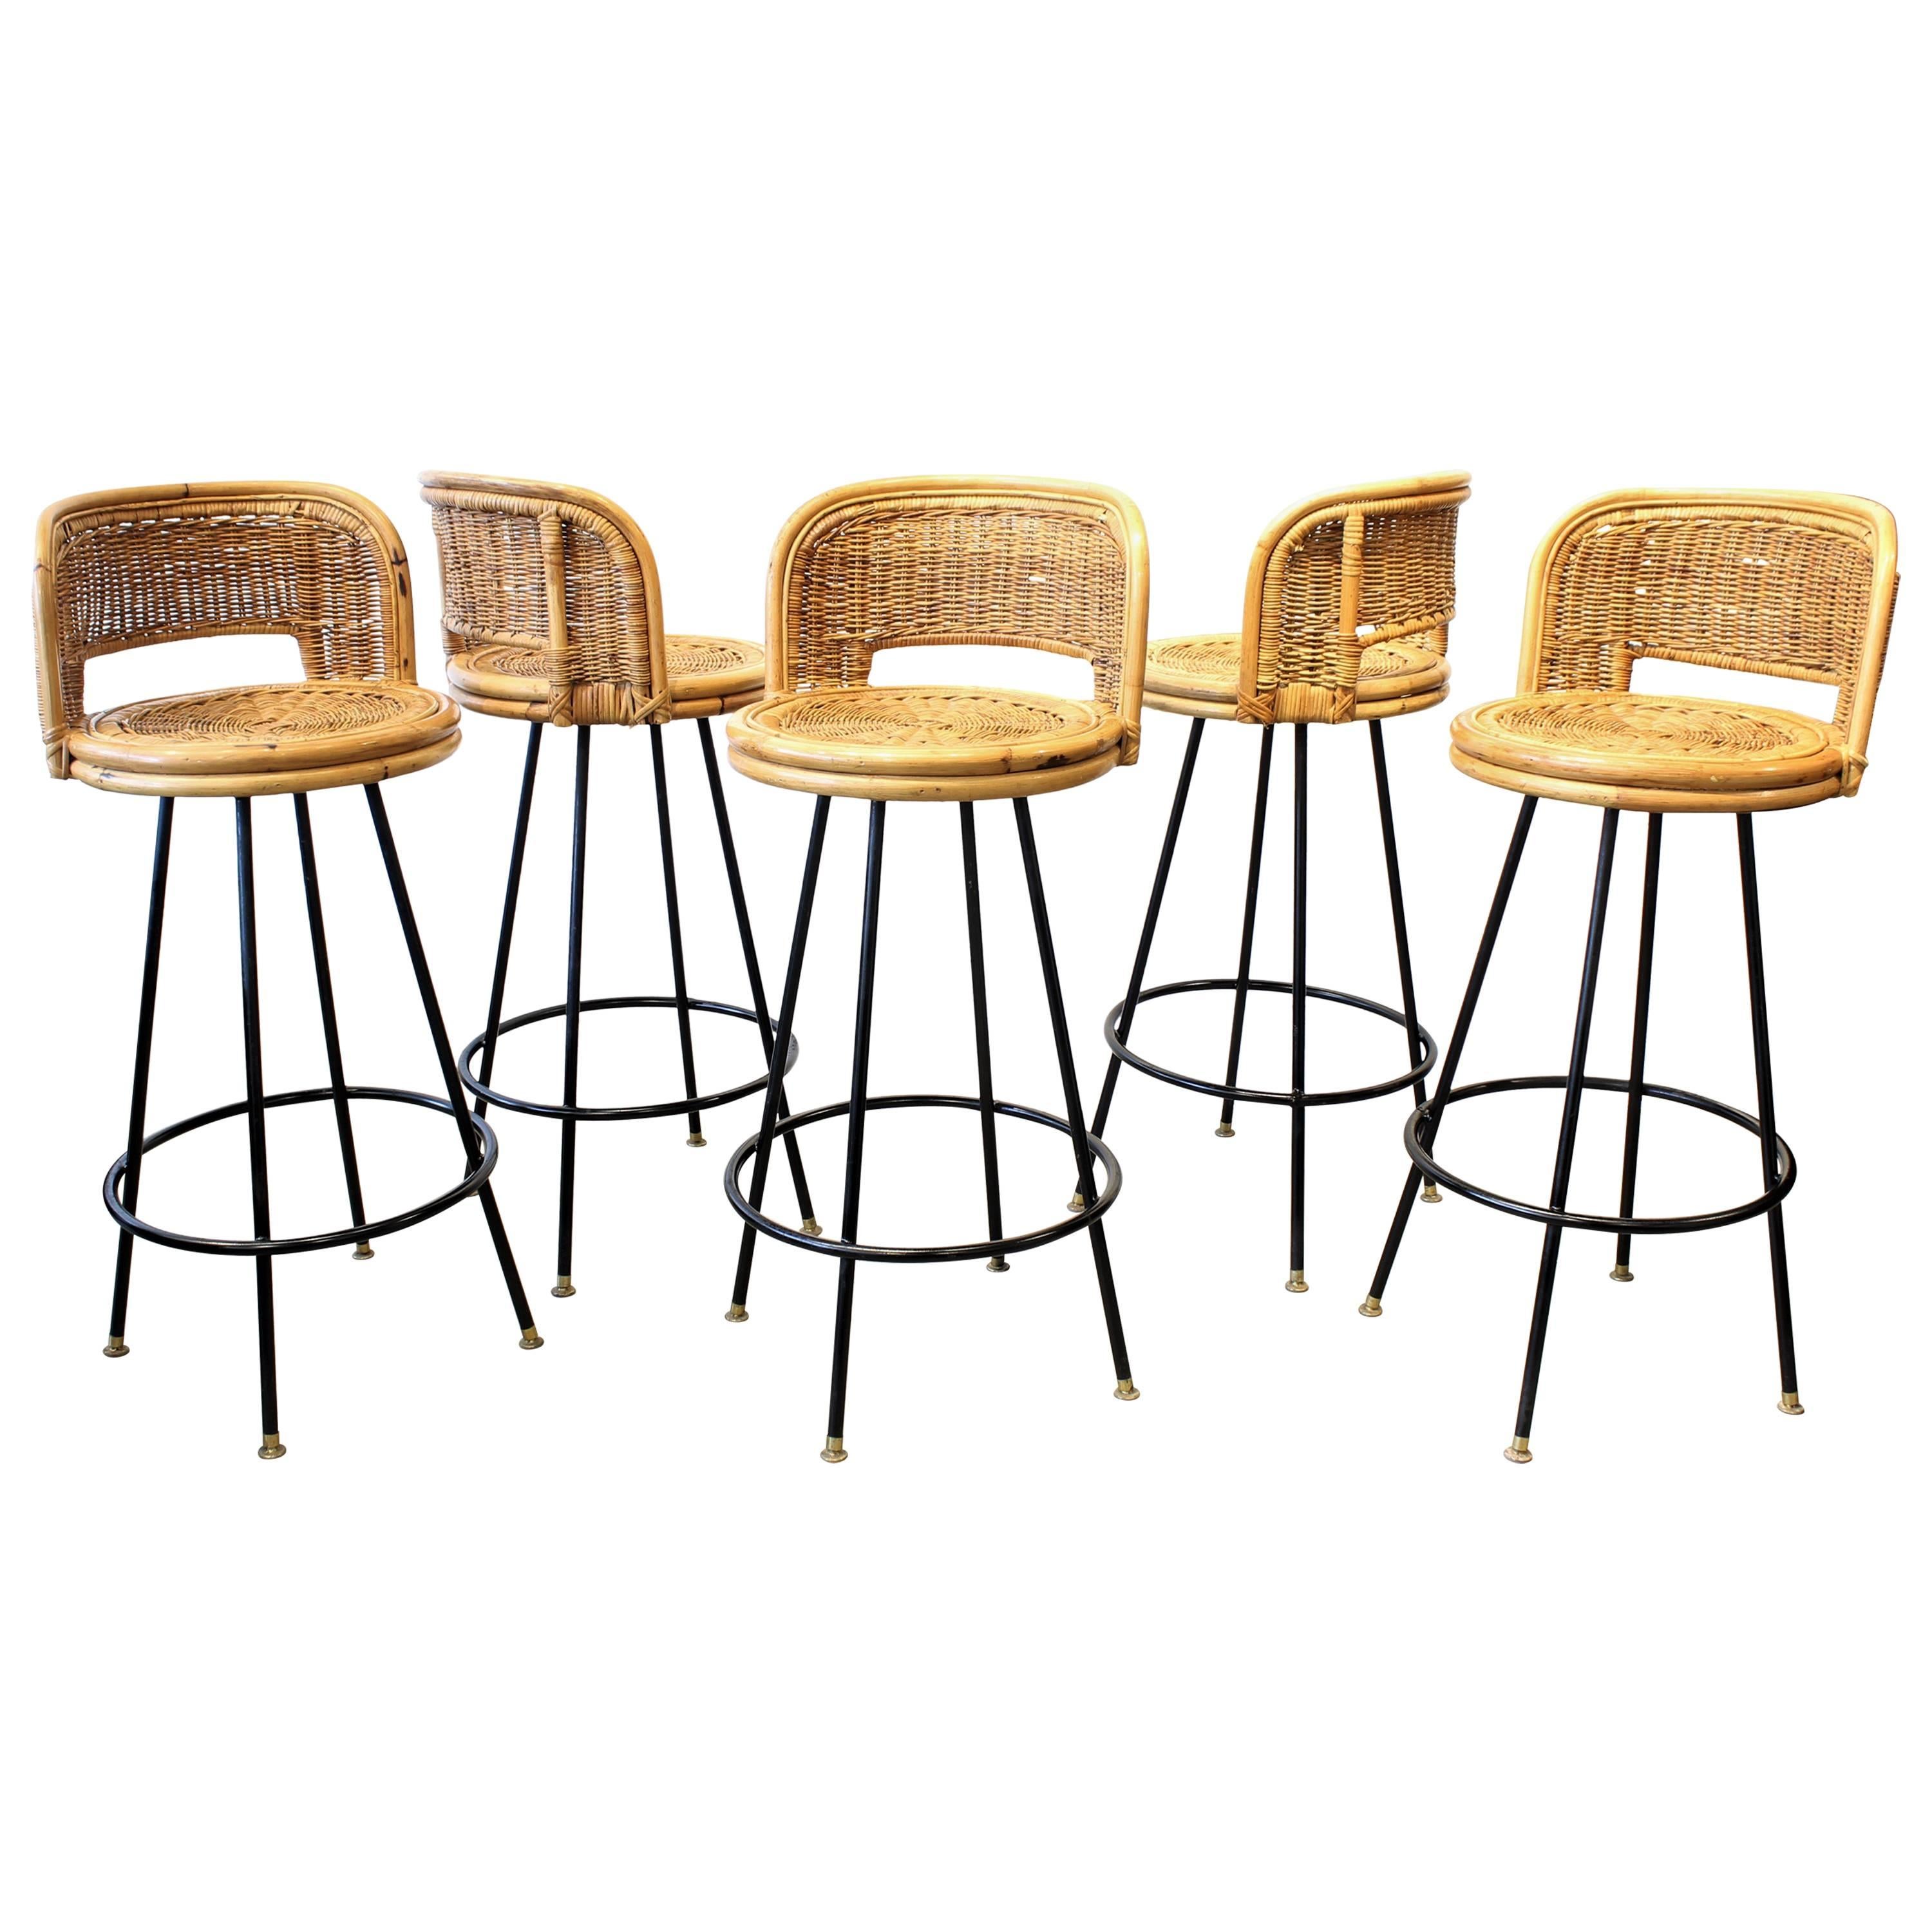 Set of Pristine Rattan and Wrought Iron Bar Stools by Seng of Chicago, 1950s